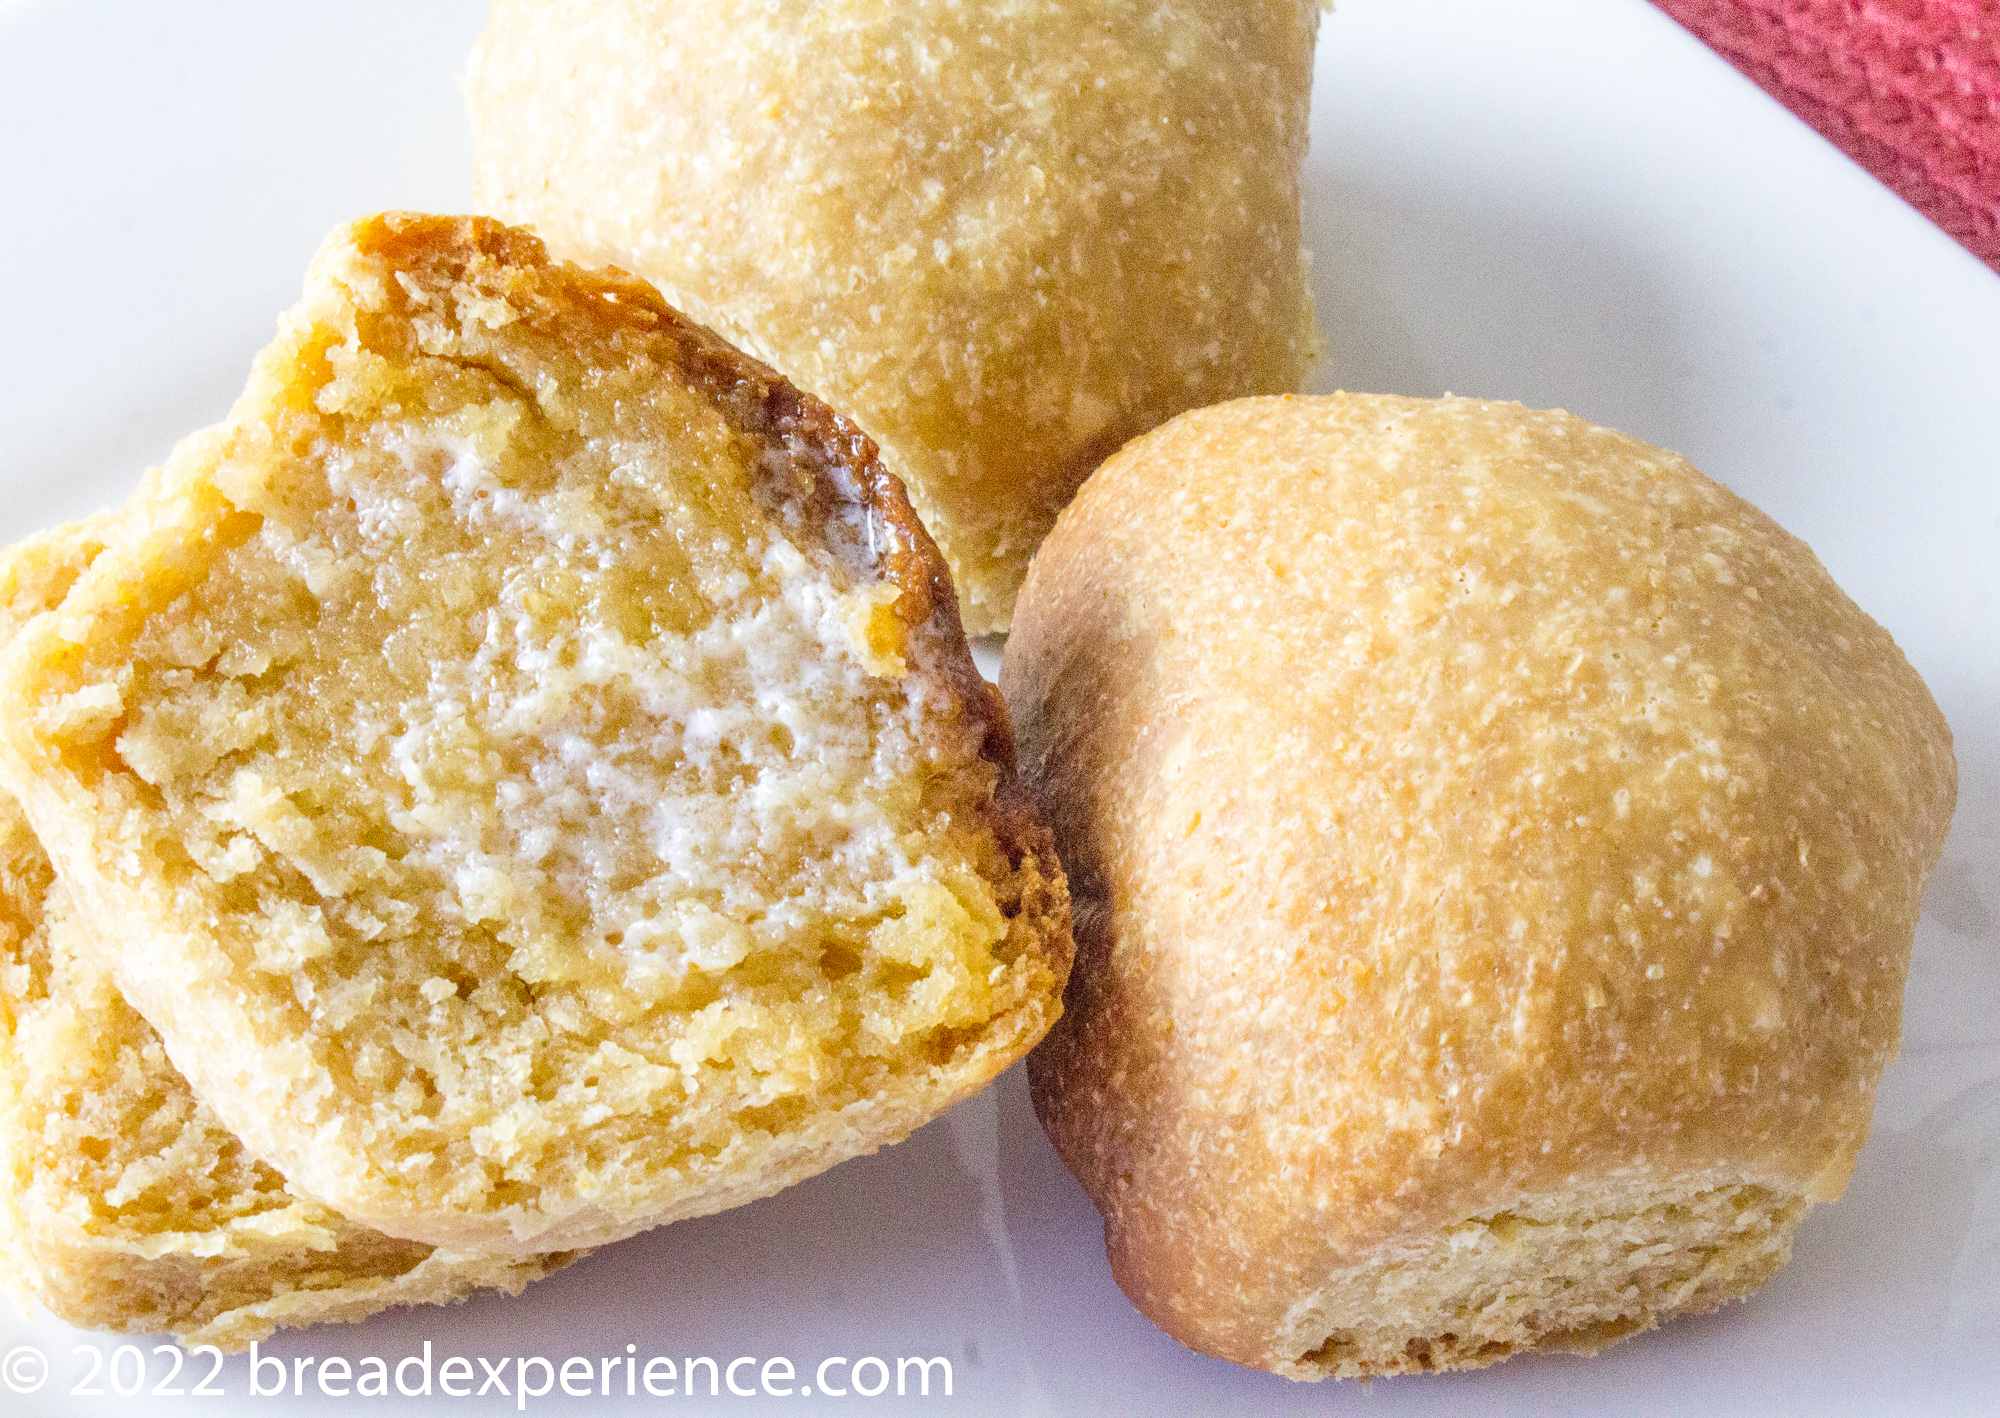 slow cooker rolls made with white whole wheat flour